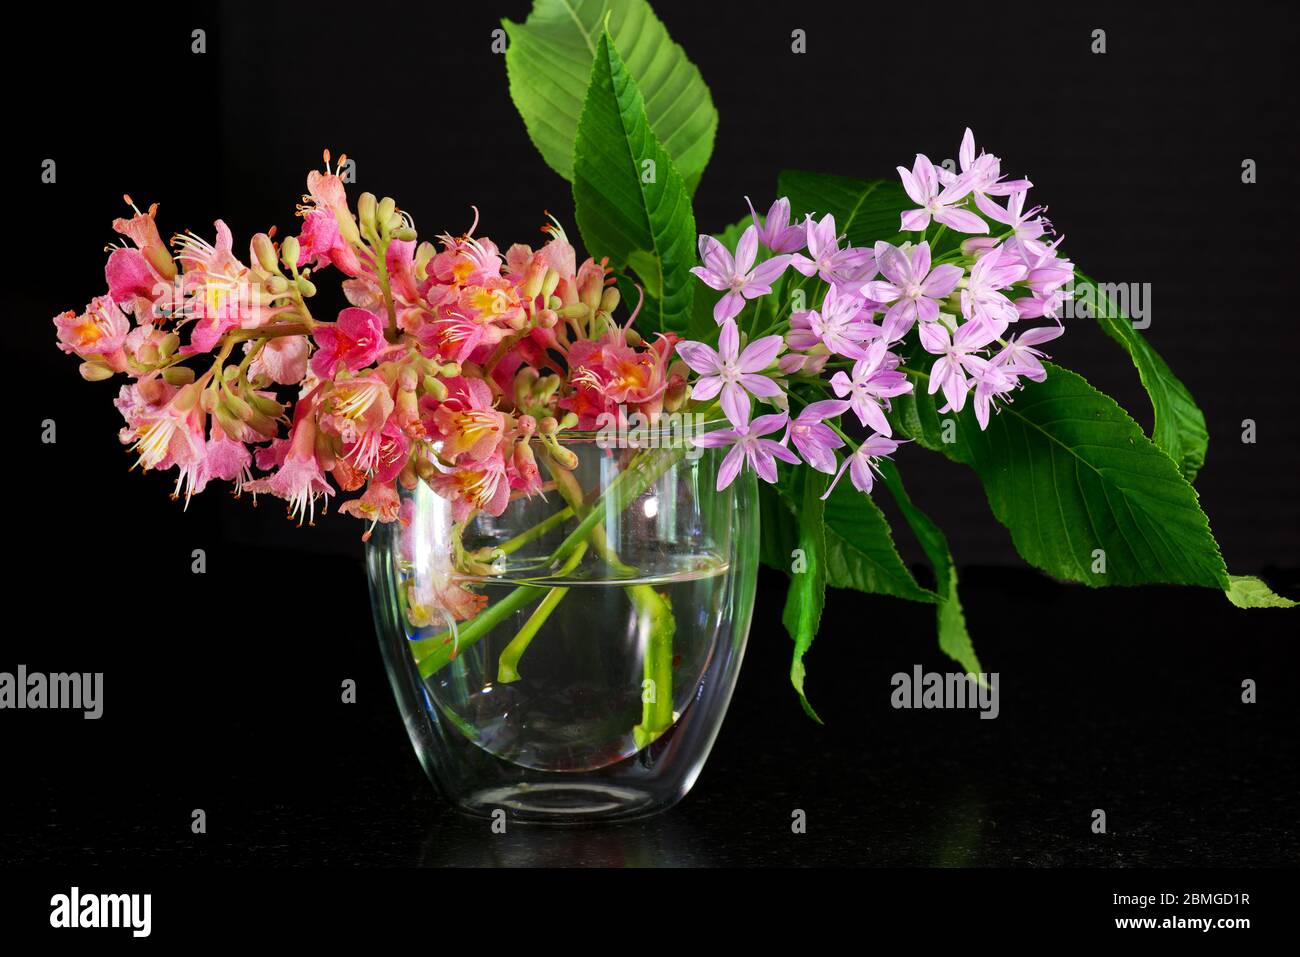 Floral arrangement of colorful spring flowers in full bloom Stock Photo